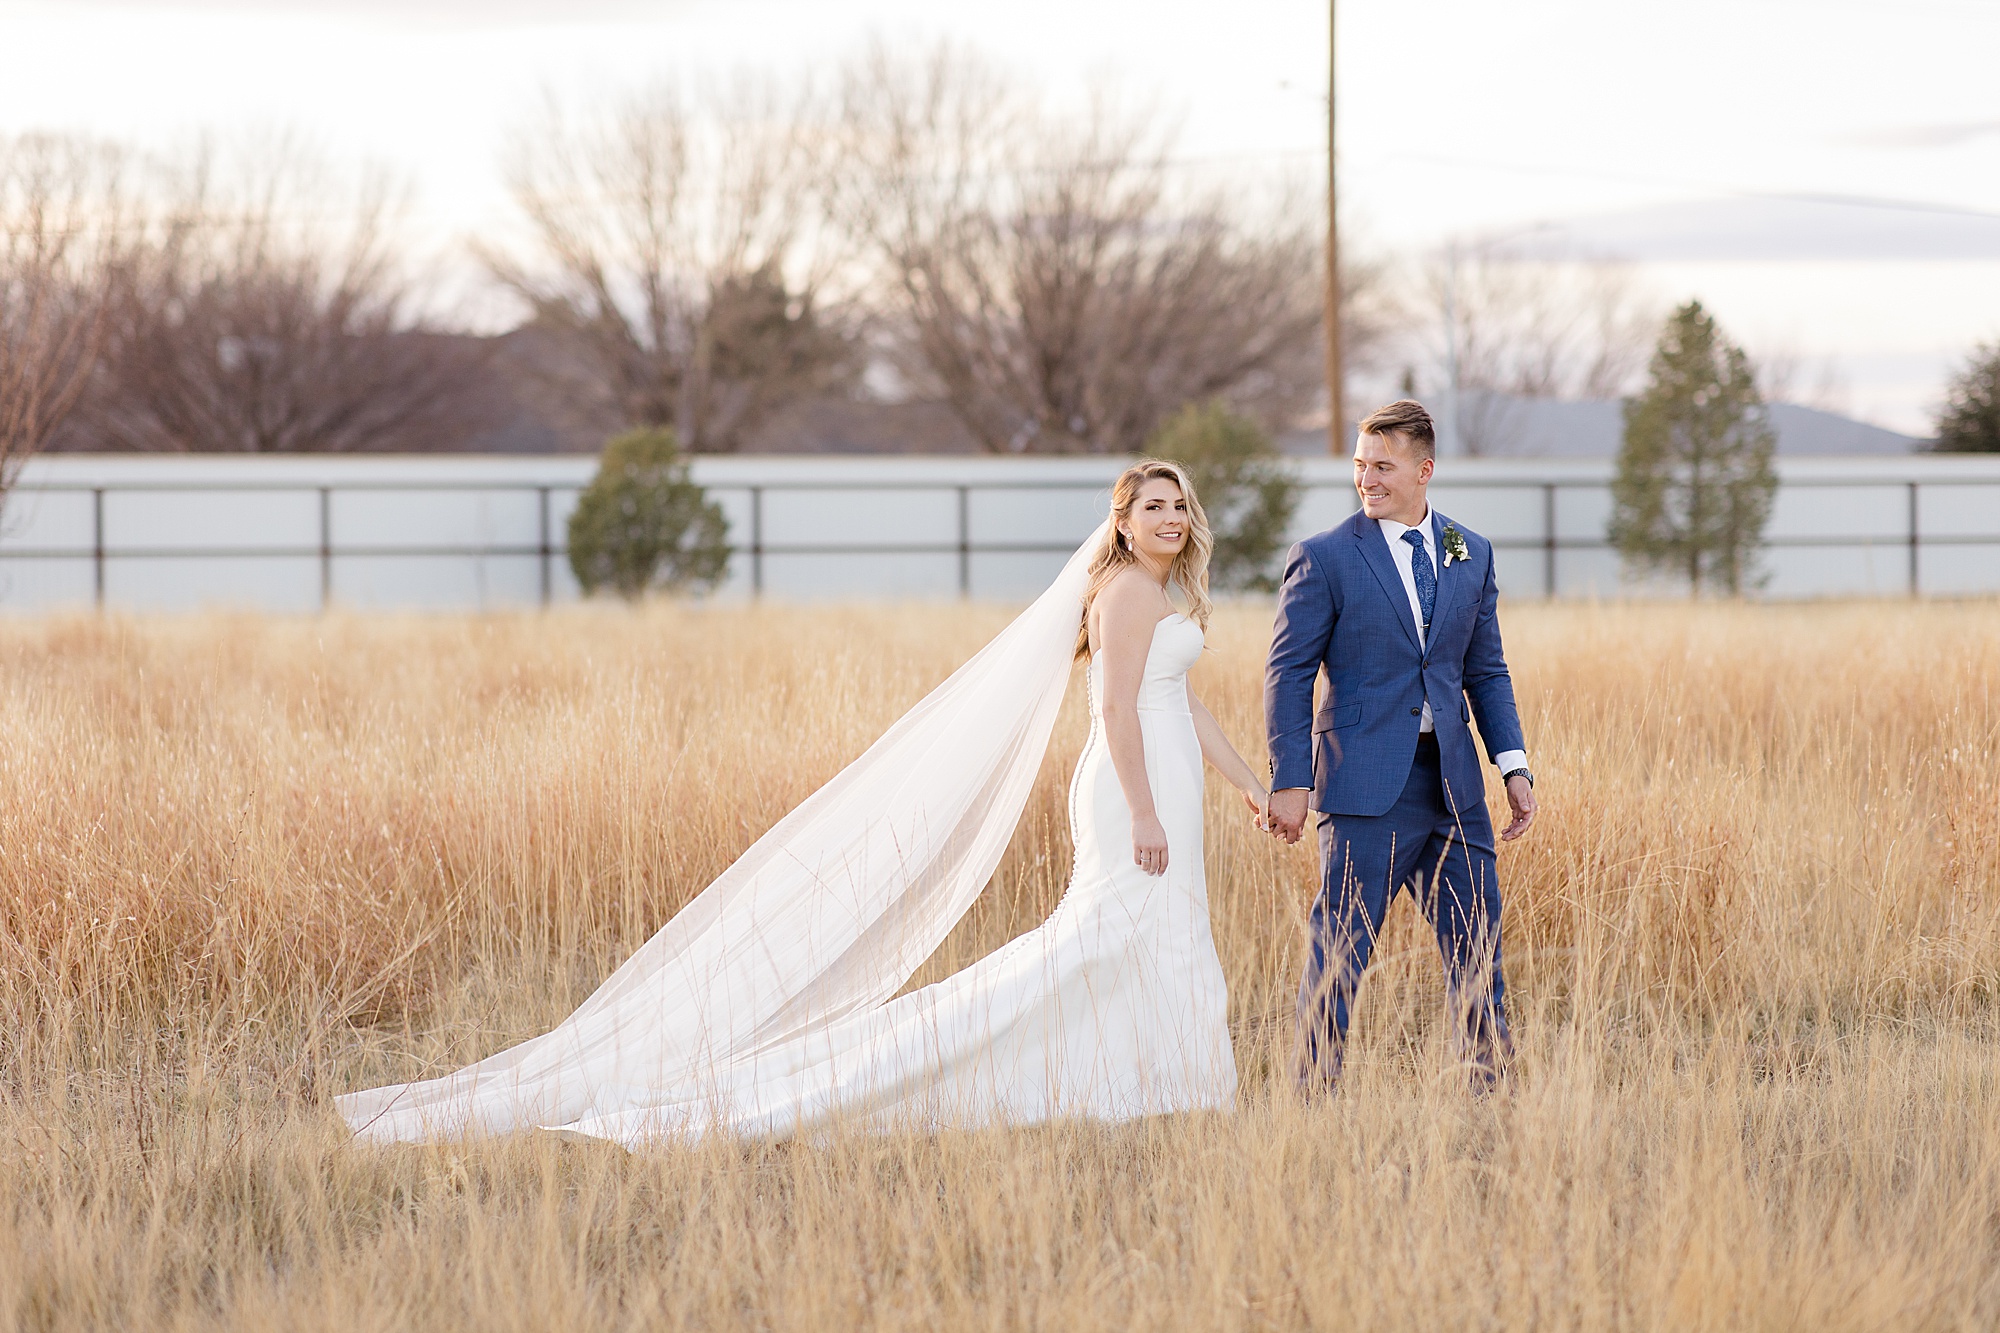 newlyweds walk together through field at sunset